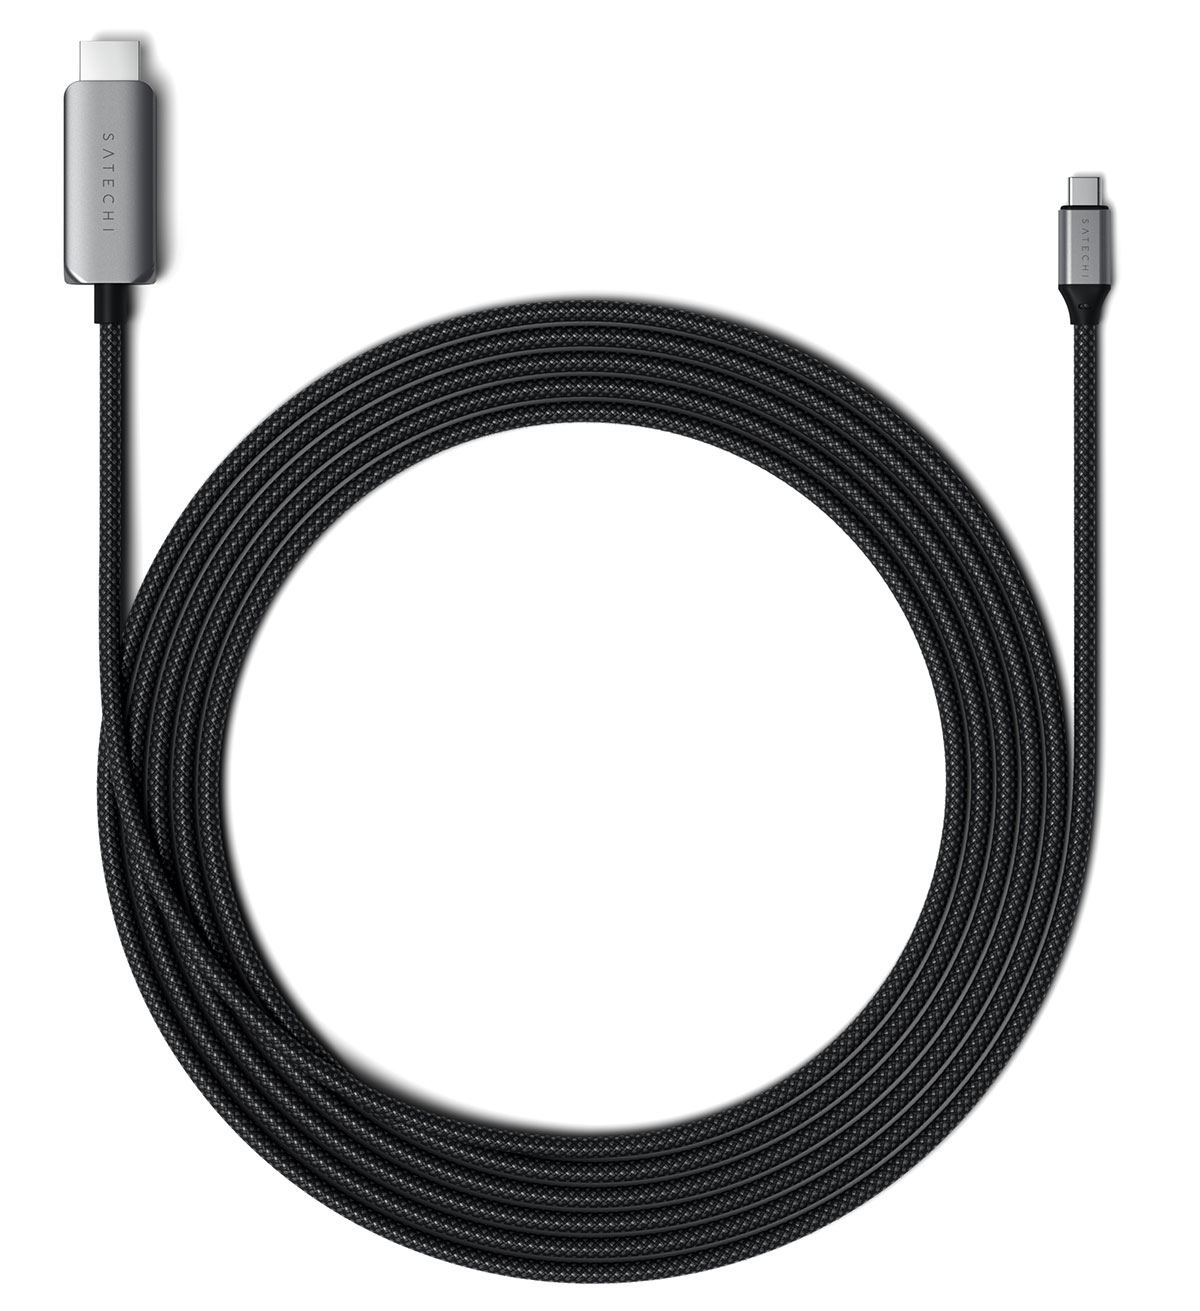 mophie USB-C Cable with USB-C Connector (3m)